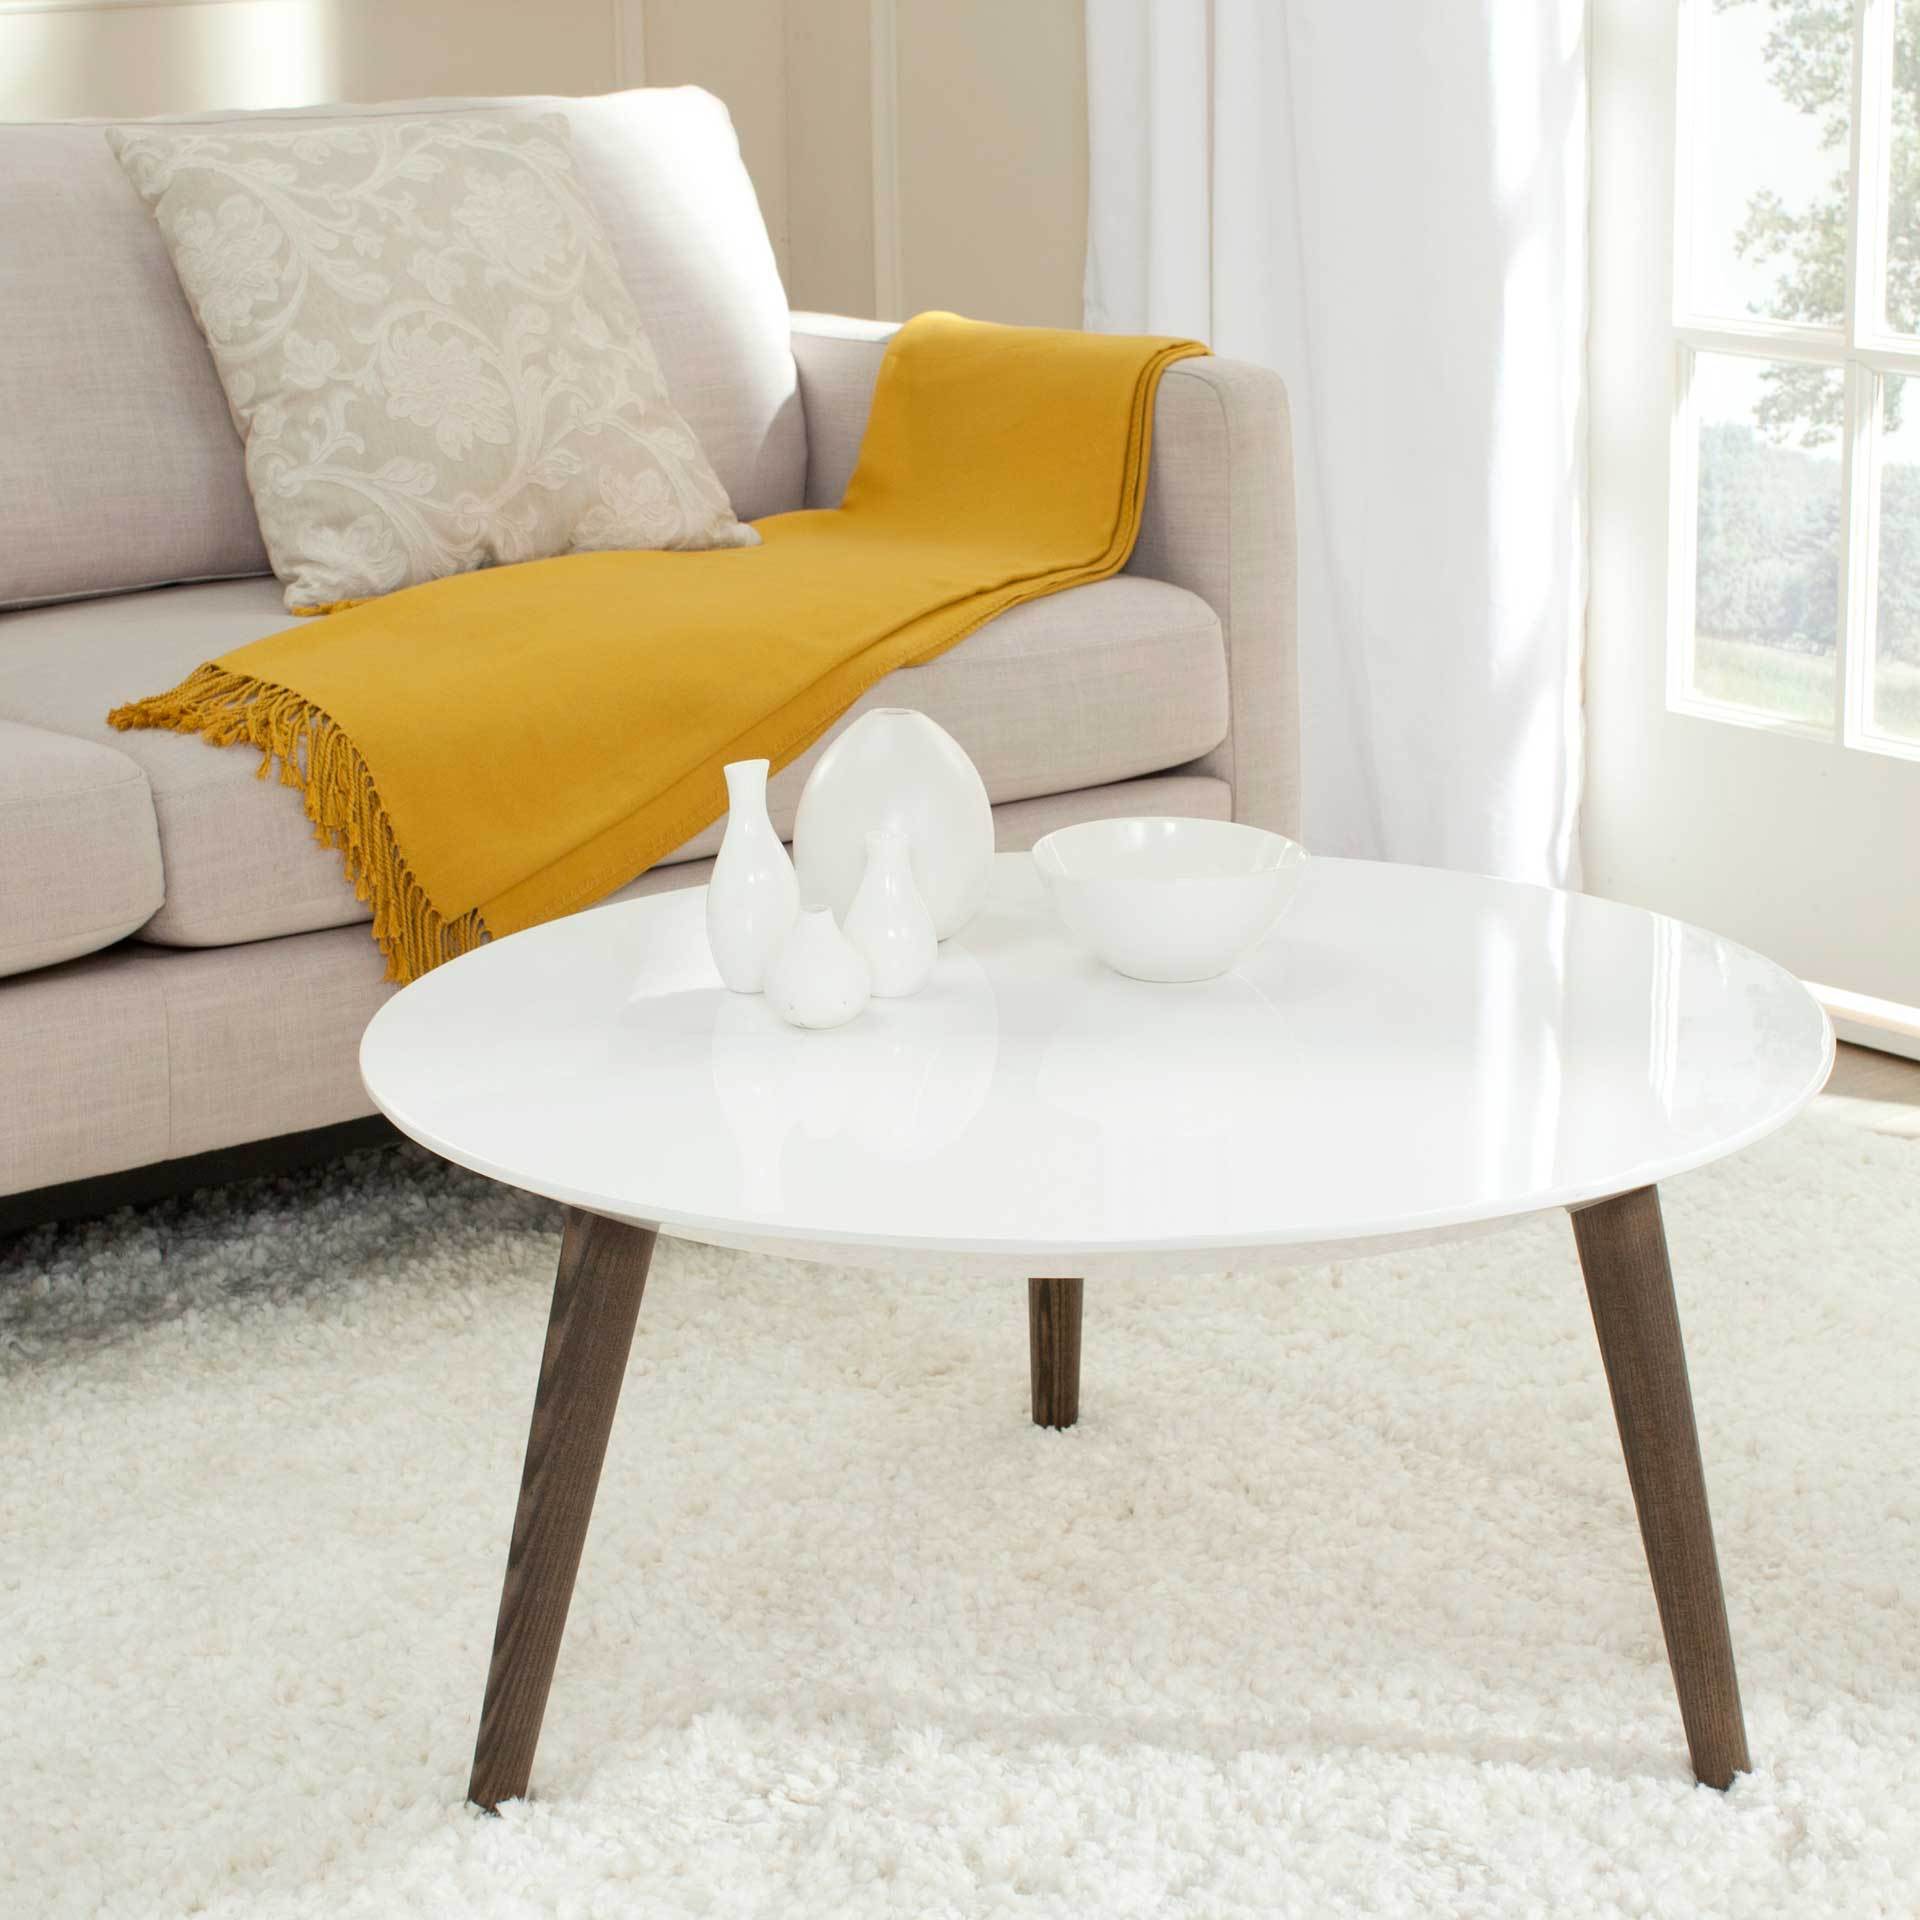 Jocelyn Round Lacquer Accent Table